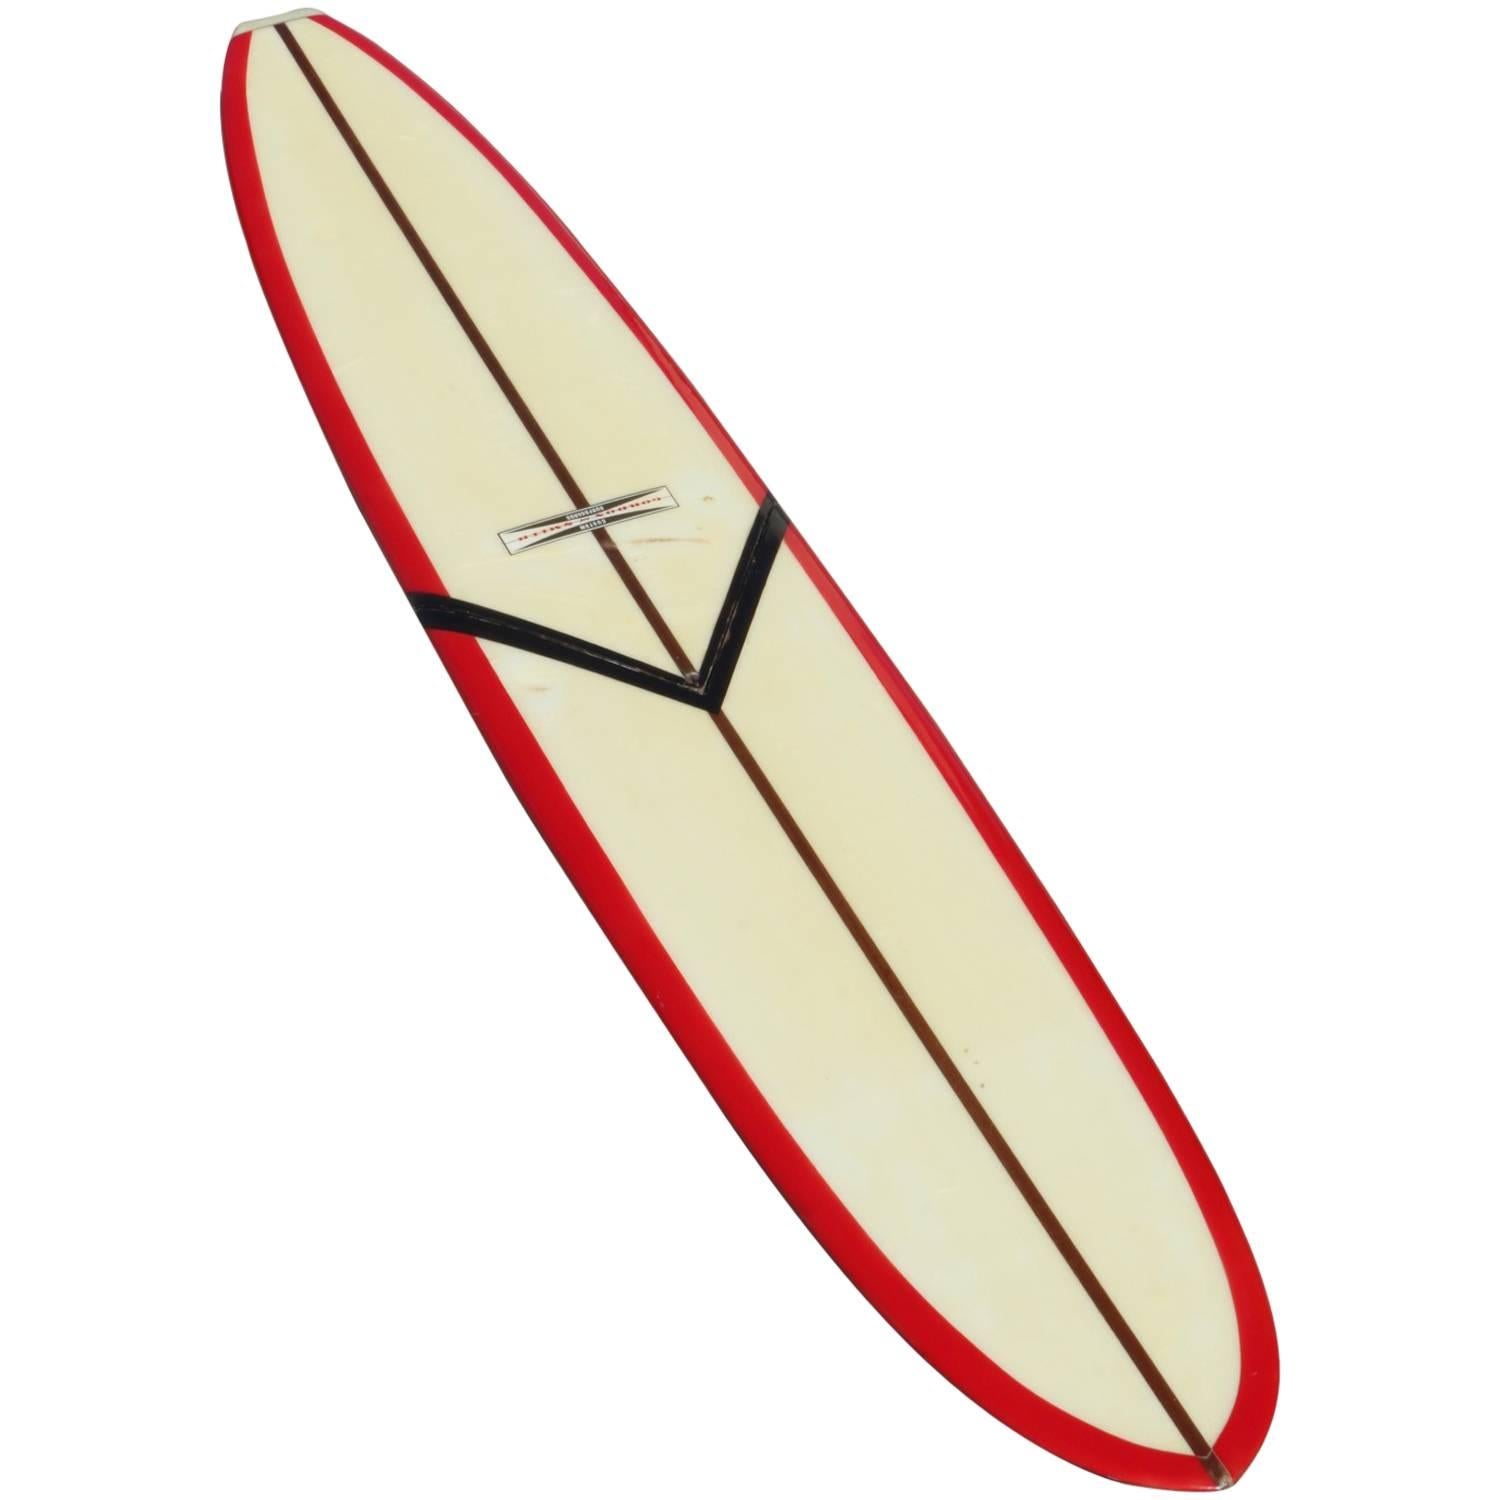  Surfboard 1966 Two Piece Bi-Sect by Gordon and Smith For Sale